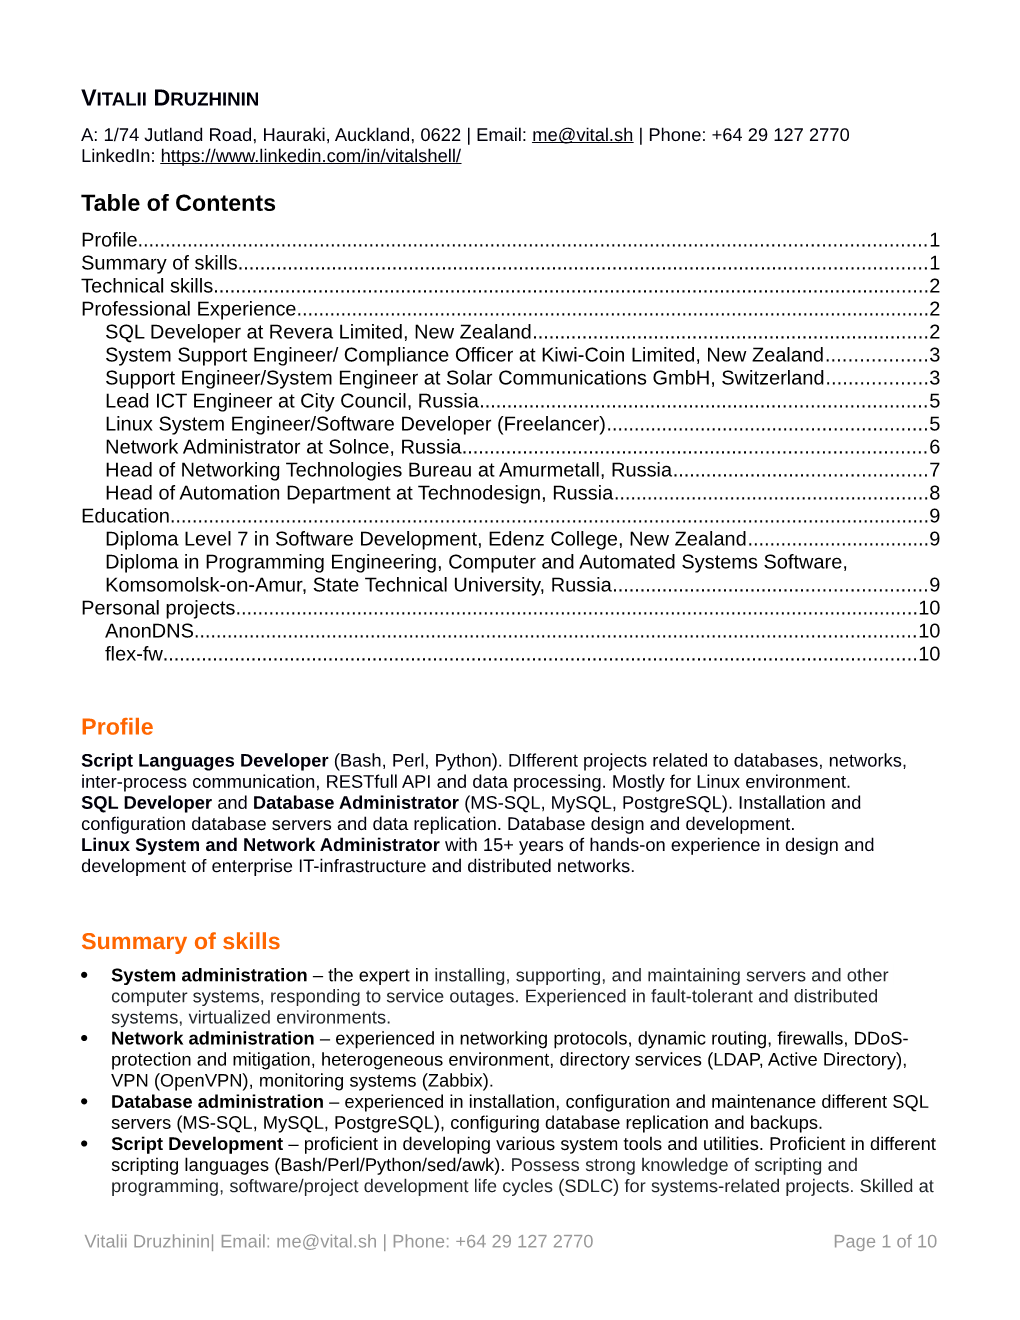 Table of Contents Profile Summary of Skills